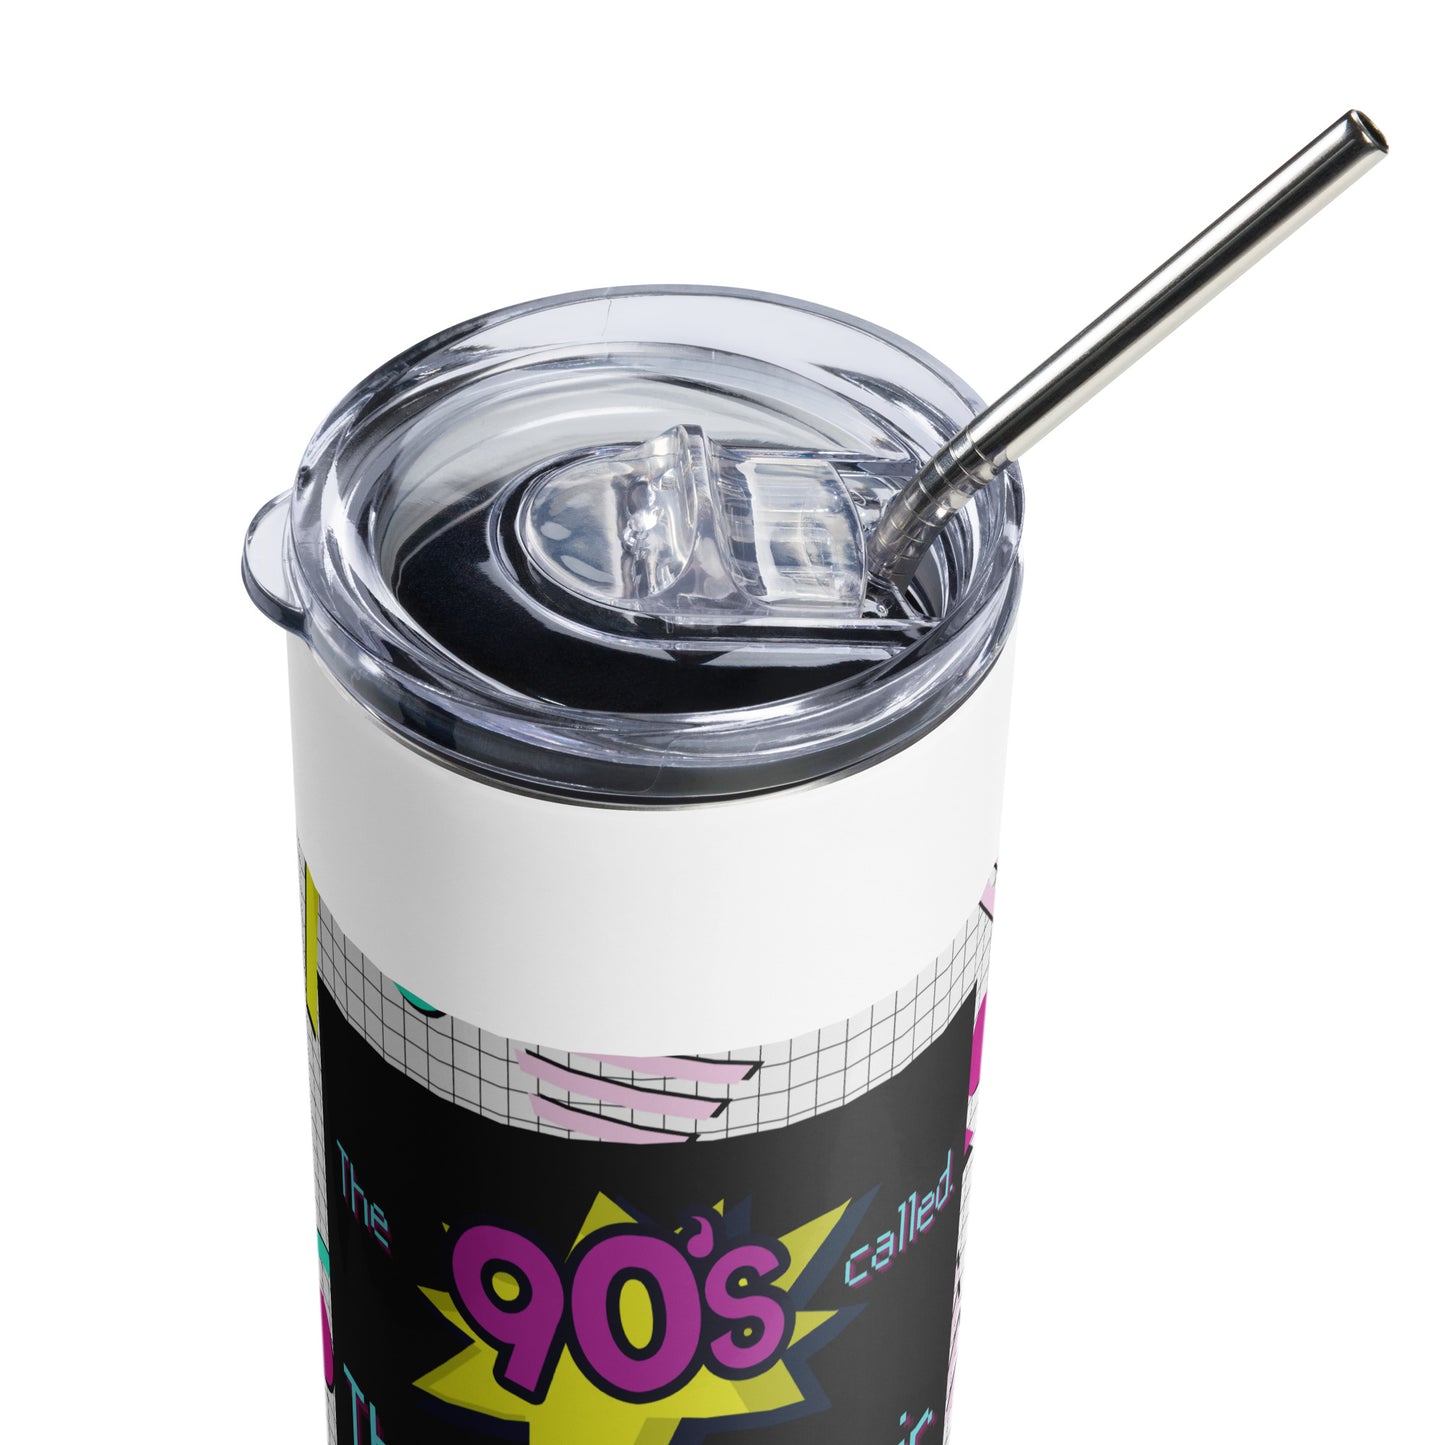 The 90's Wants Their Philanthropy Back Stainless steel tumbler